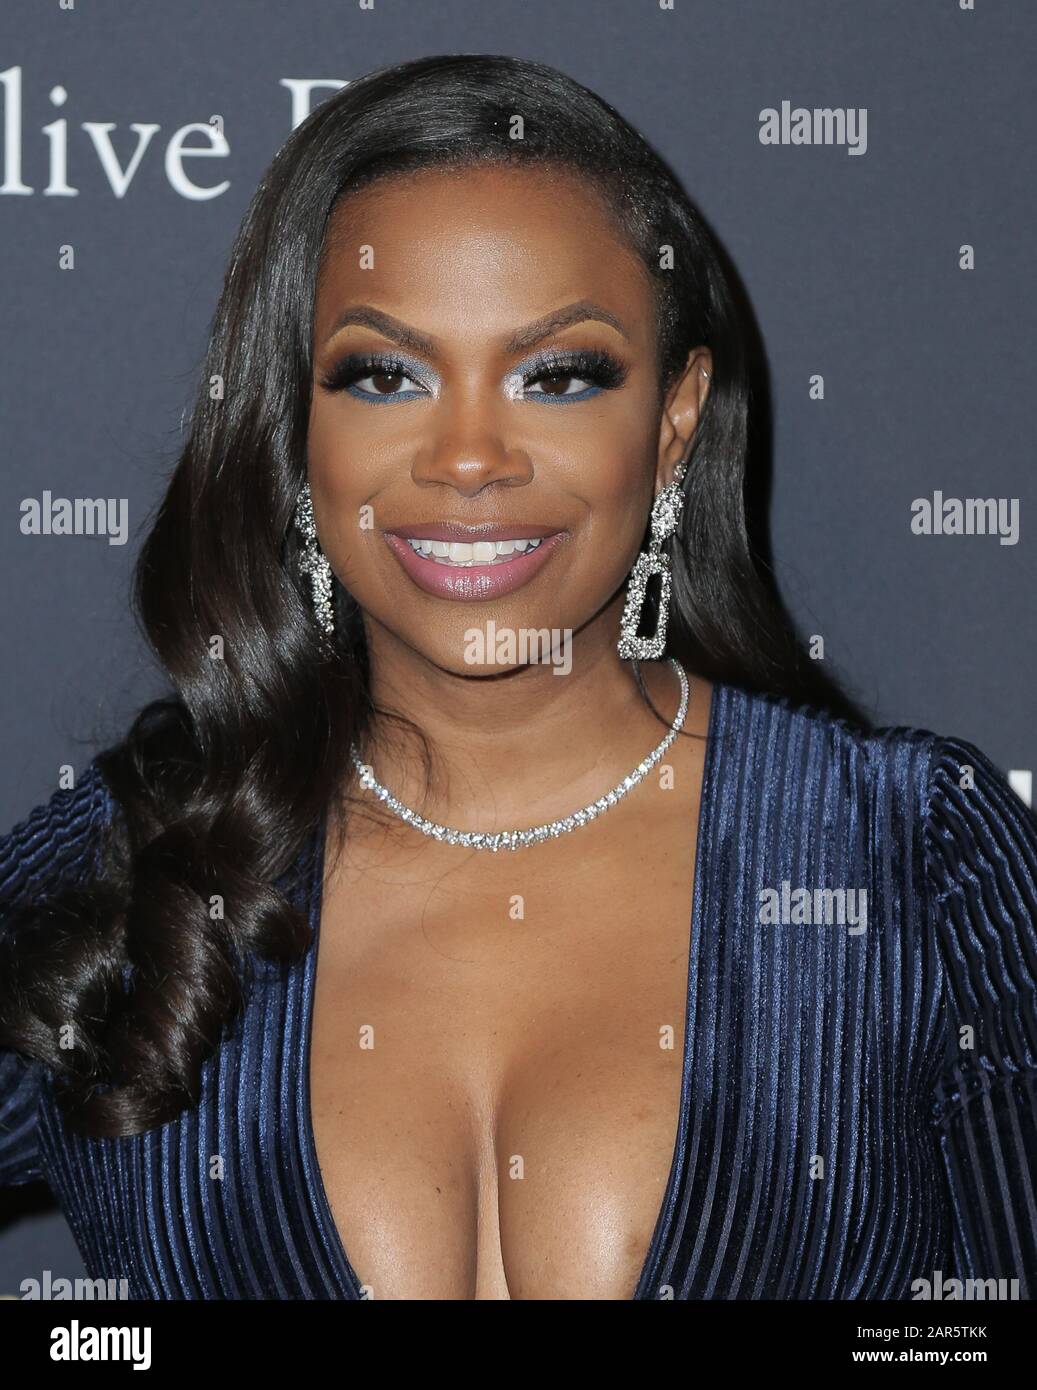 Kandi Buruss  walking the red carpet at the Clive Davis' 2020 Pre-Grammy Gala held at The Beverly Hilton Hotel on January 25, 2020 in Los Angeles, California USA (Photo by Parisa Afsahi/Sipa USA) Stock Photo